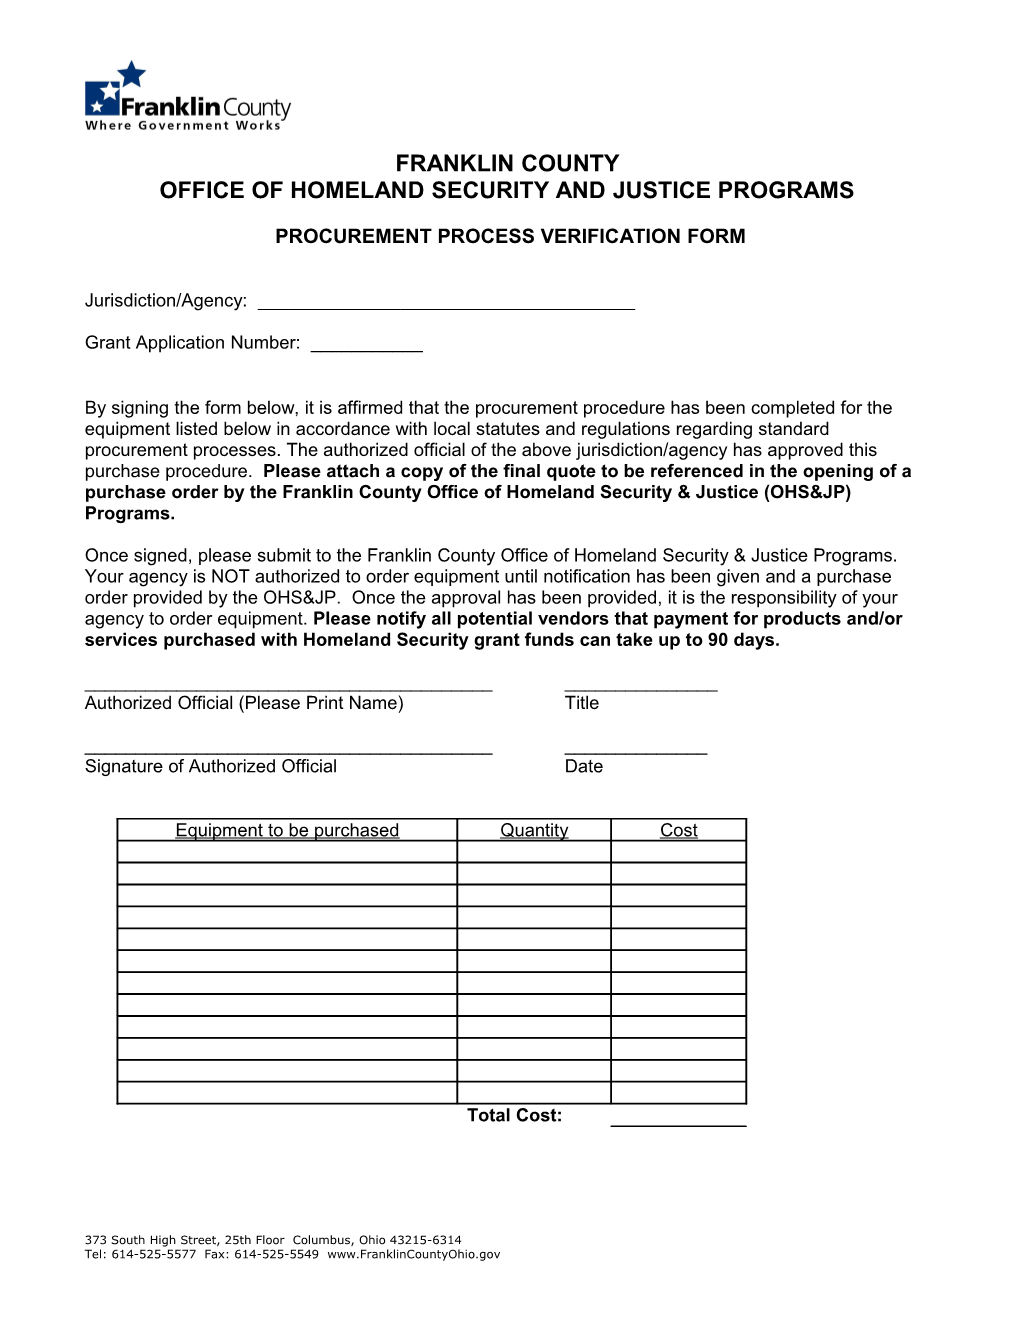 Office of Homeland Security and Justice Programs